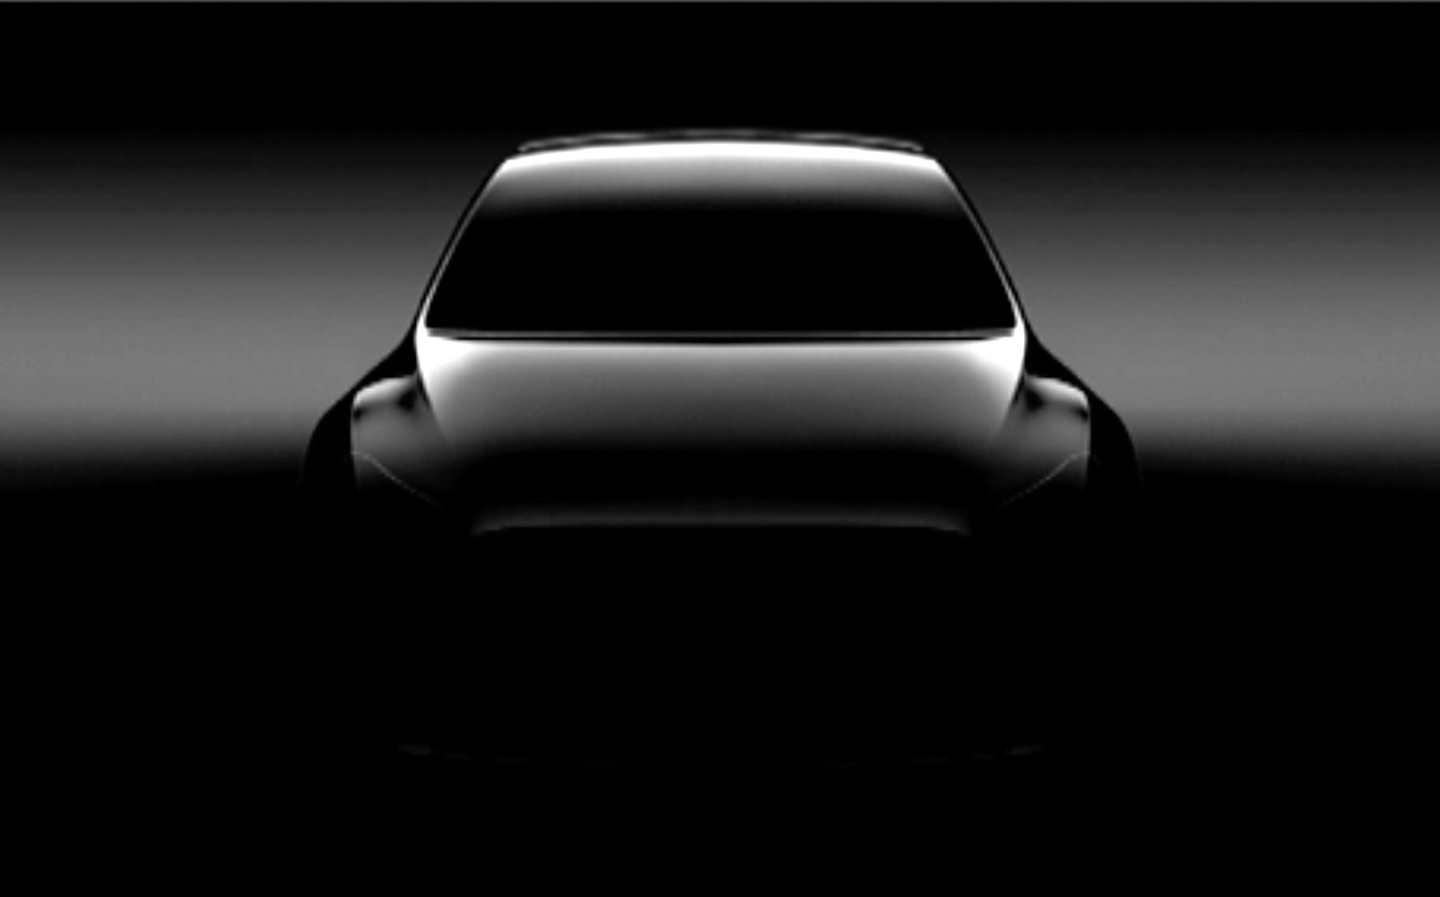 Tesla is aiming to start building the Model Y compact crossover in November next year, according to reports. It will join the American manufacturer's line-up of Model S, Model X and Model 3 electric cars, completing boss Elon Musk's vision of models that spell the word "S3XY"... well, "S3XY", as Ford already owned the rights to a car called the "Model E".